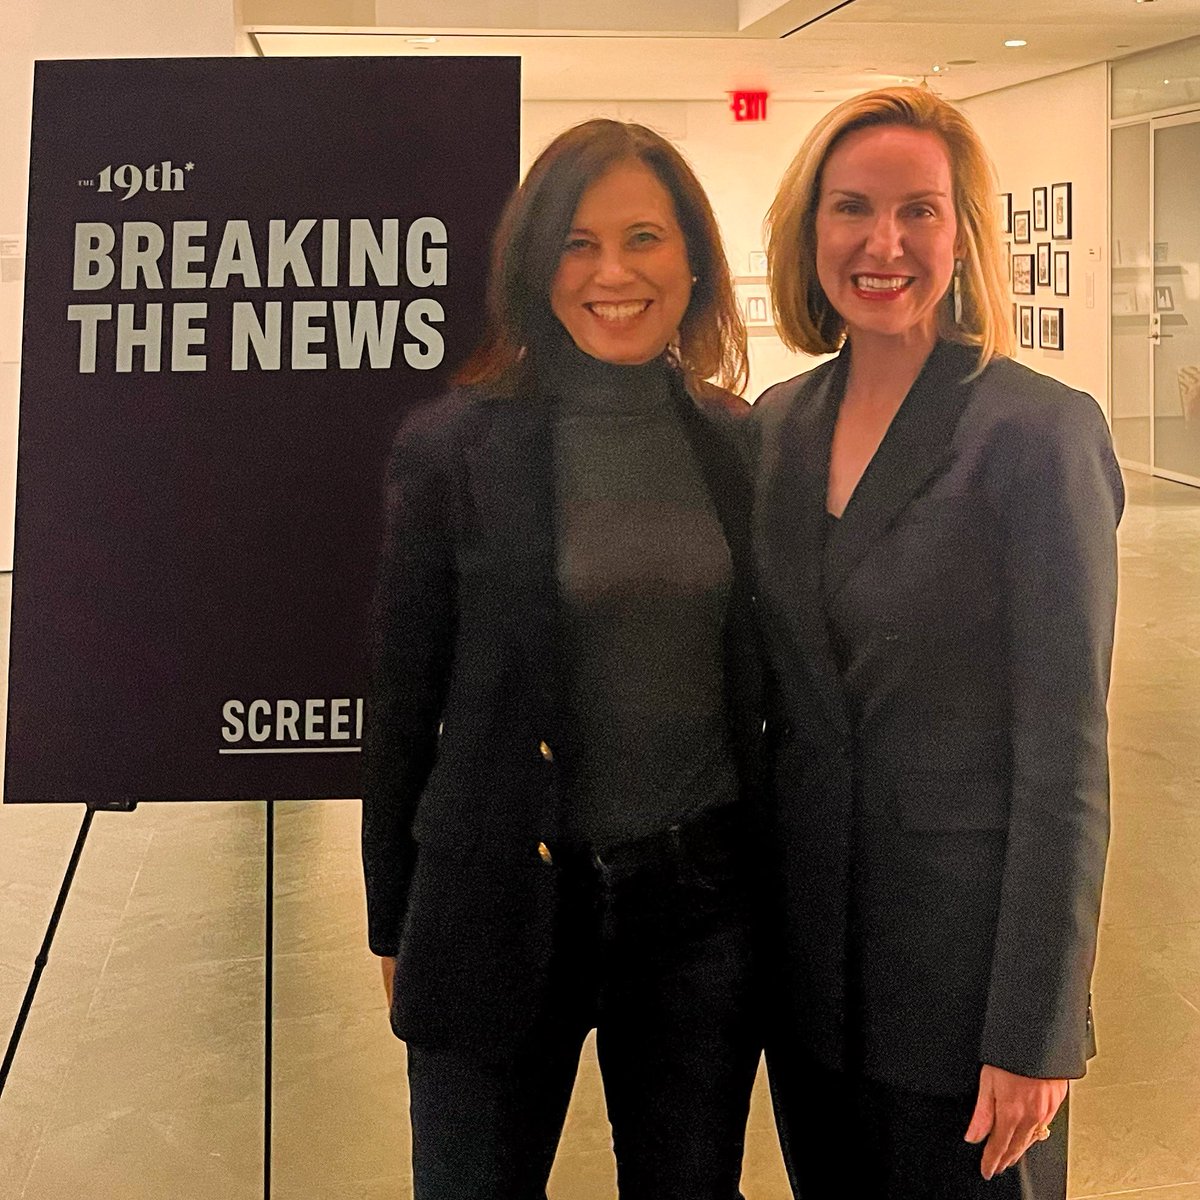 Congrats to @19thnews, @eramshaw and the whole 19thnewsroom! The excellent @pbs doc Breaking the News is an extraordinary behind-the-scenes look into the founding of the groundbreaking nonprofit newsroom focused on women & politics. Highly recommend 🎥💪🏼